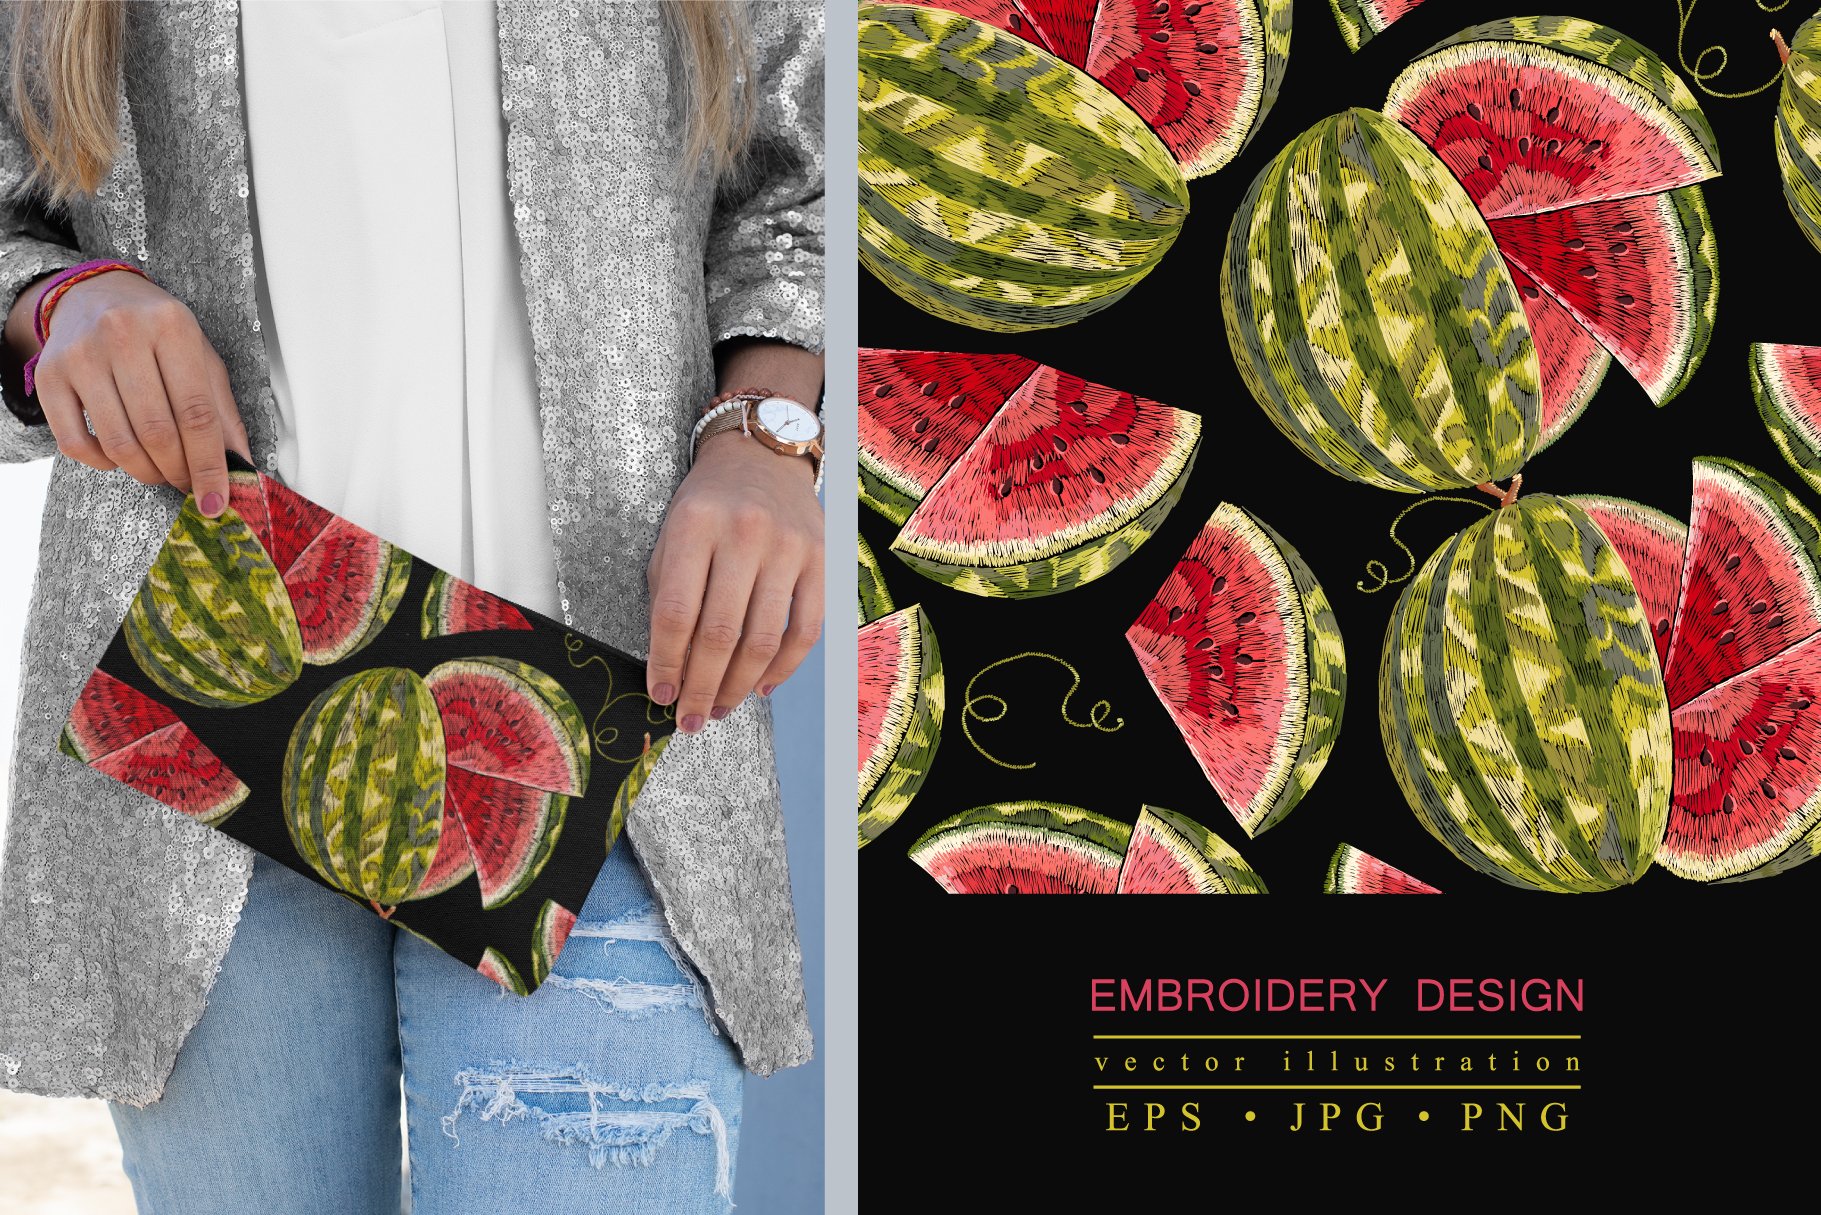 Embroidery watermelon pattern cover image.